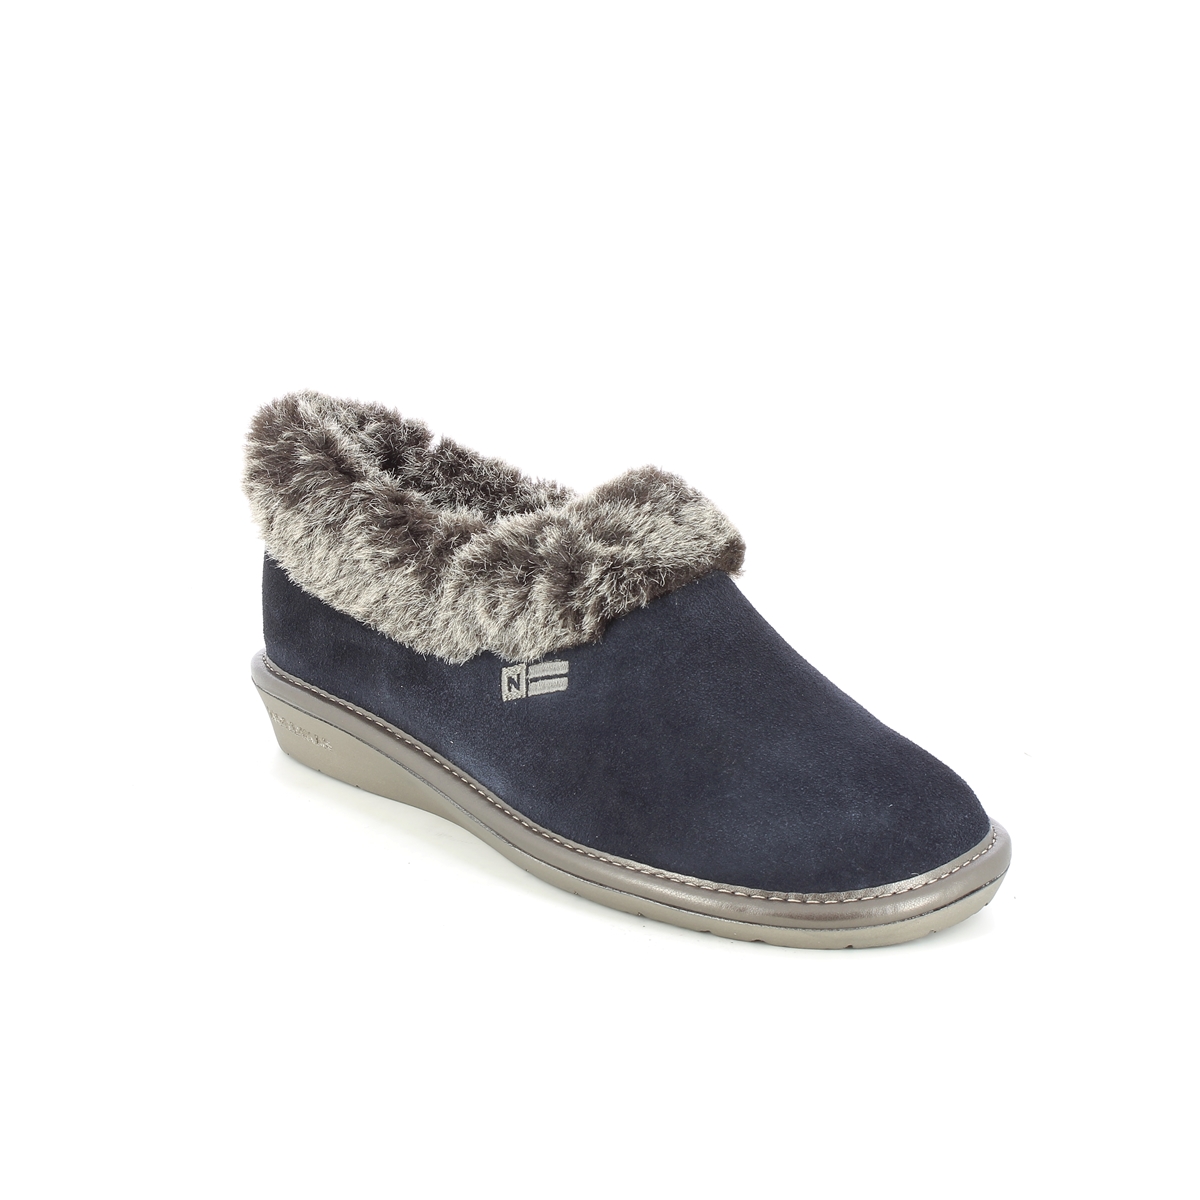 Nordikas Toasty Fur Navy Suede Womens Slippers 1358-4O In Size 40 In Plain Navy Suede